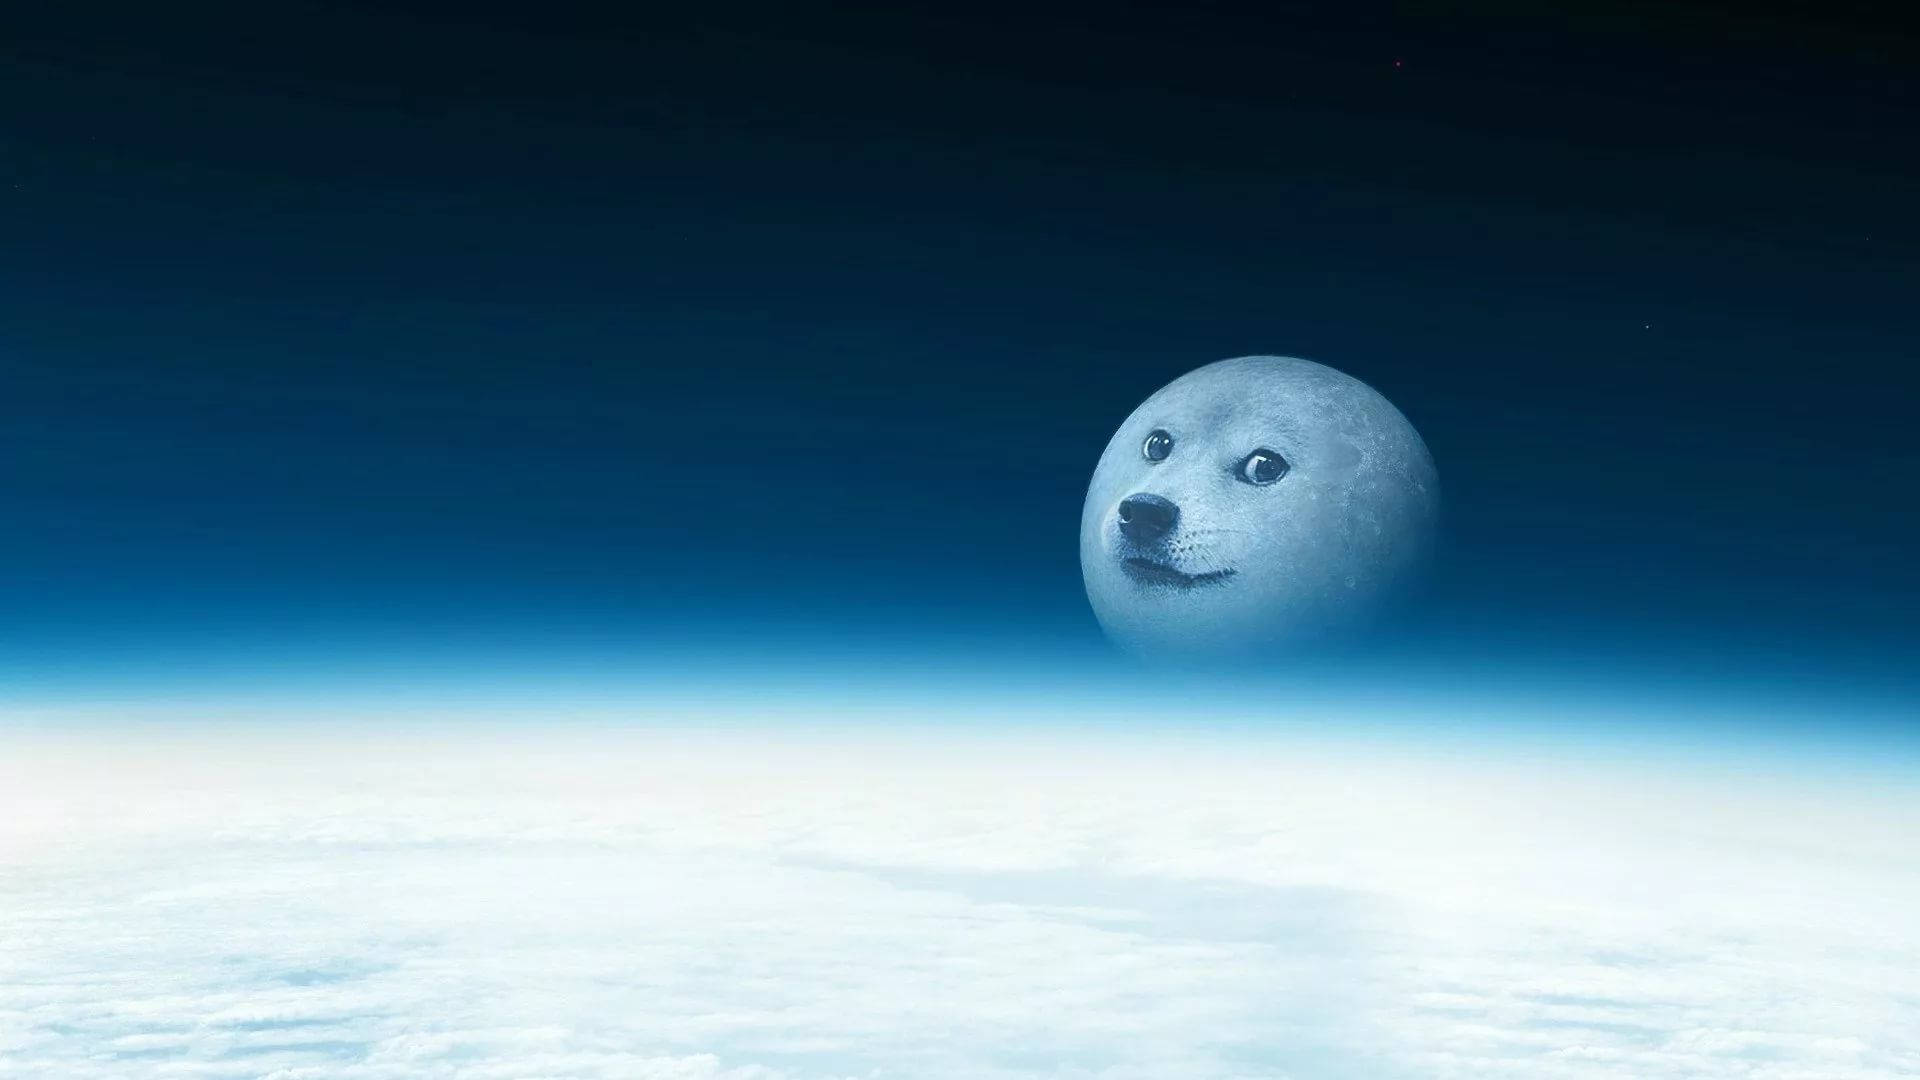 "The Dogemoon is real!" Wallpaper